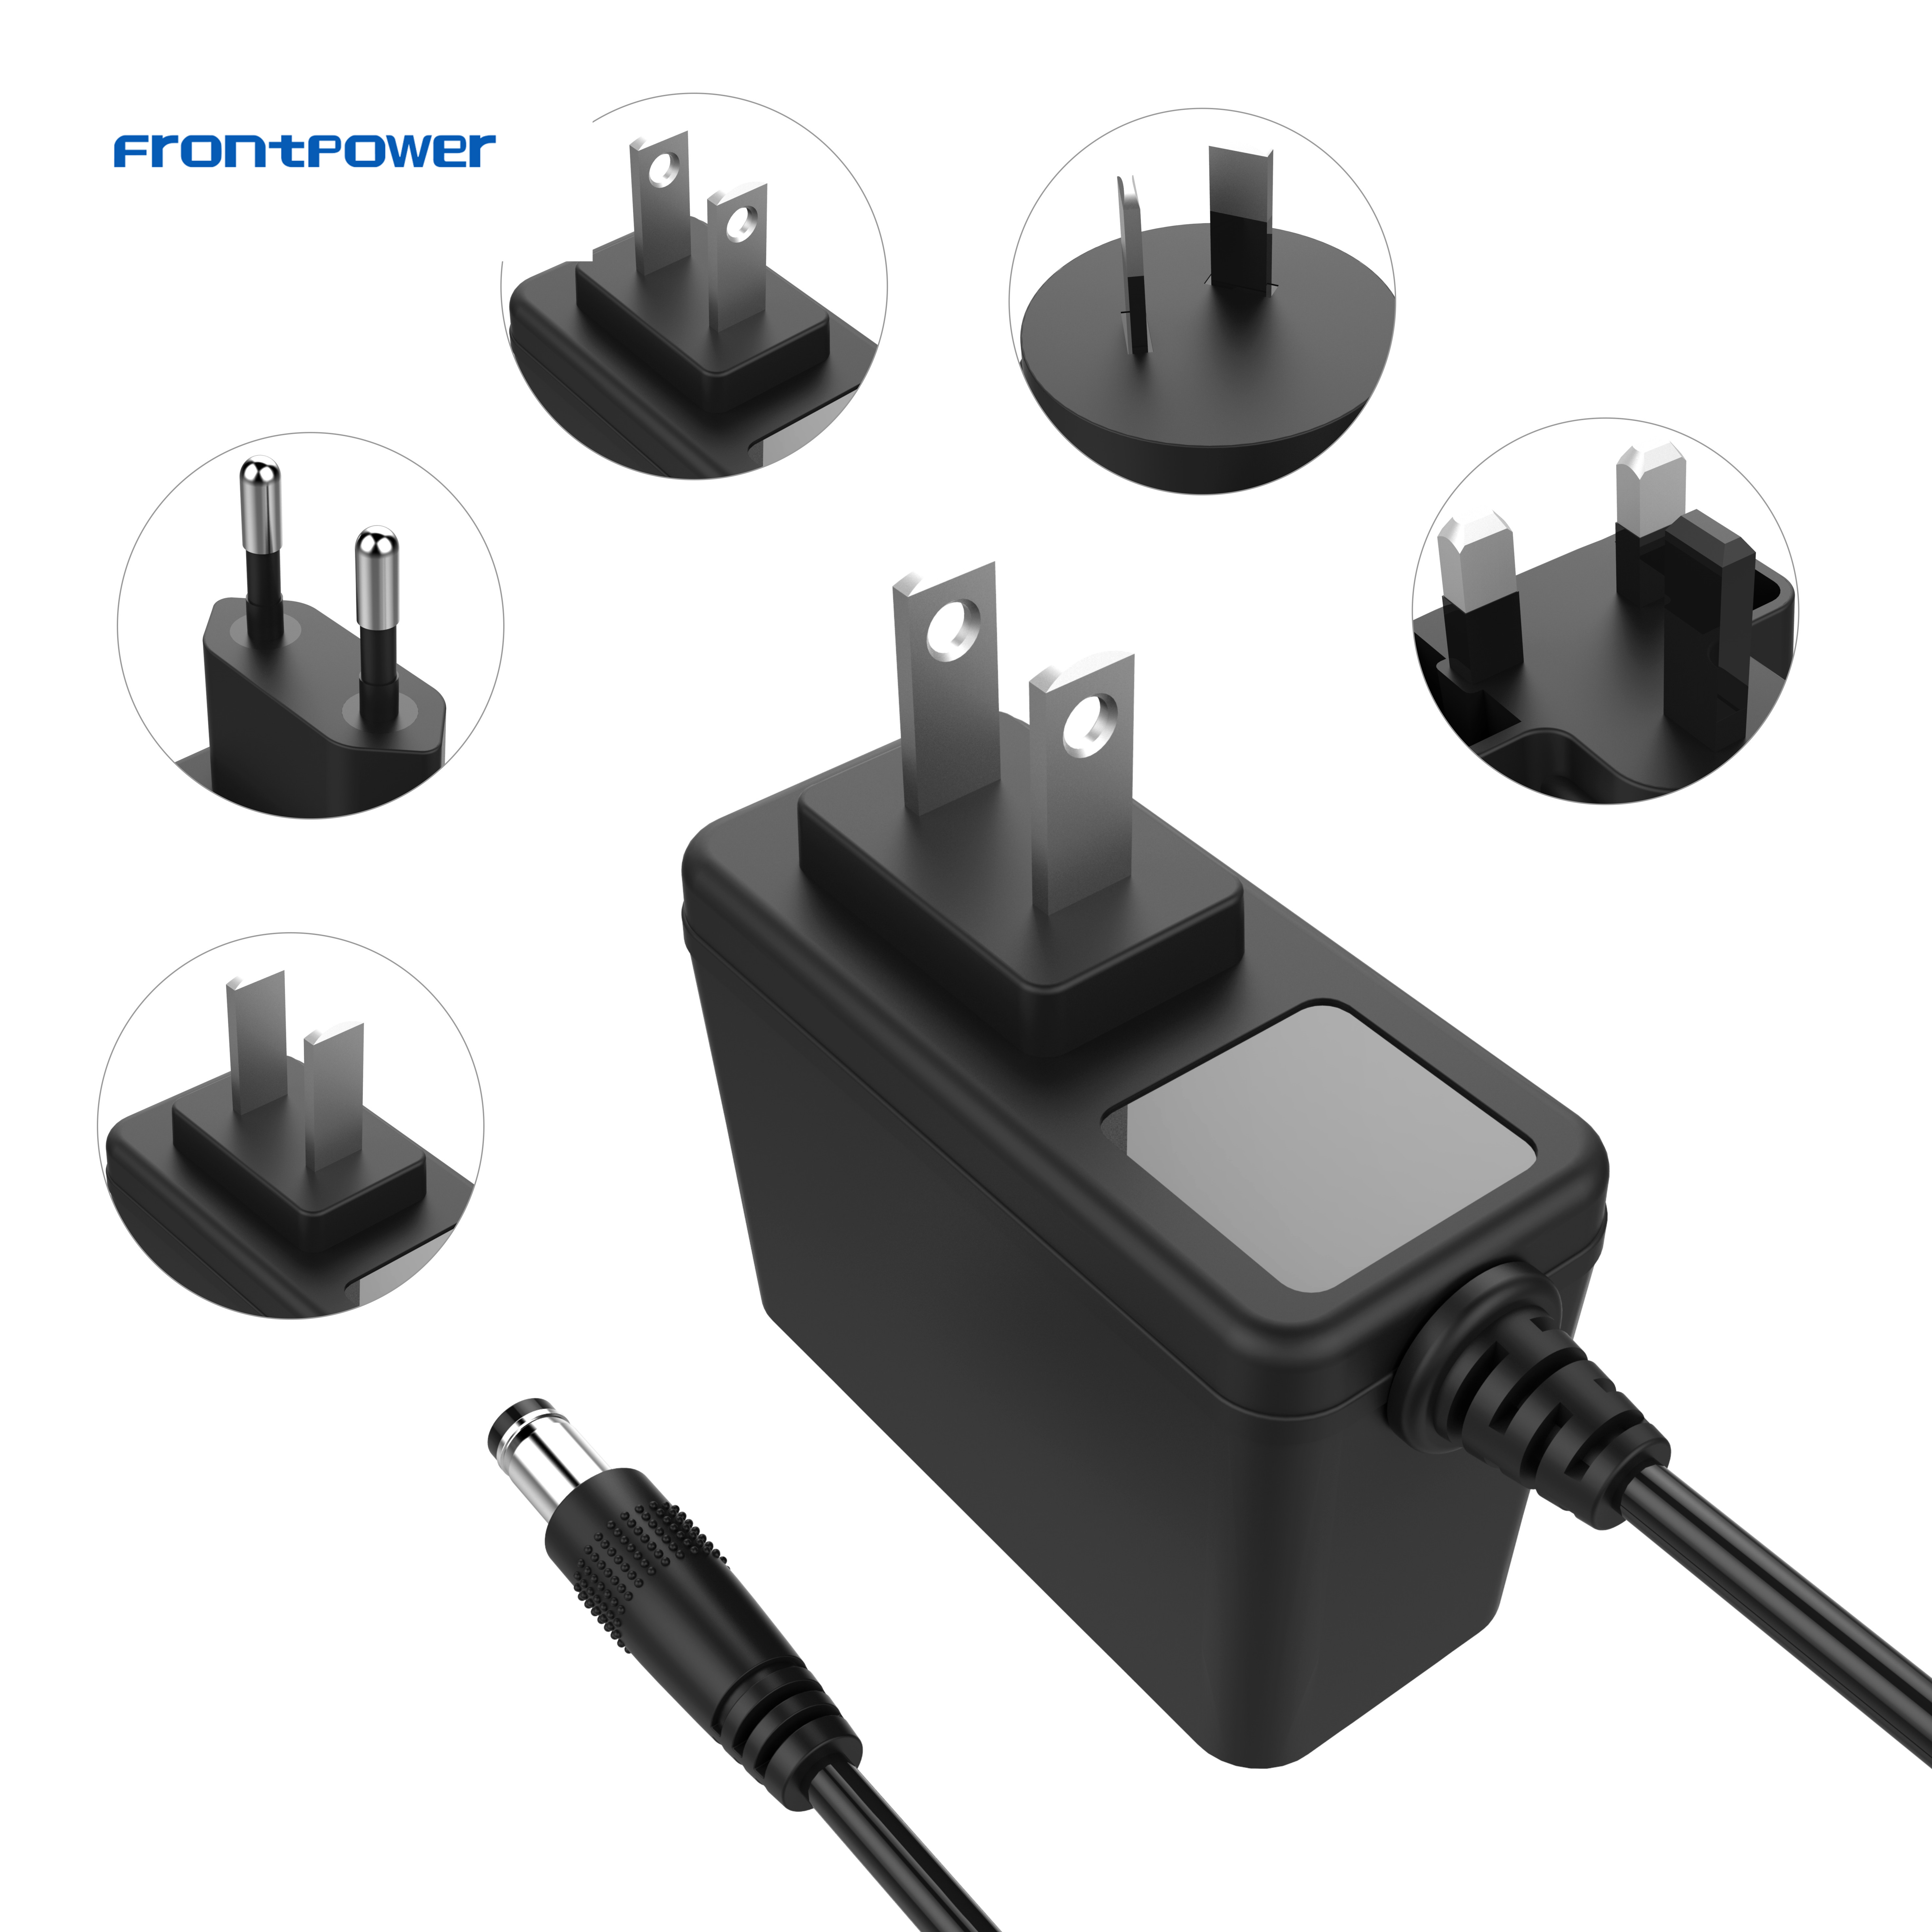 6V 8V 9V 12V 24V 0.5A 1A 1.5A 2A US EU UK AU PSE IND Plug SMPS Wall Power Adapter Supply Switch ACDC Charger